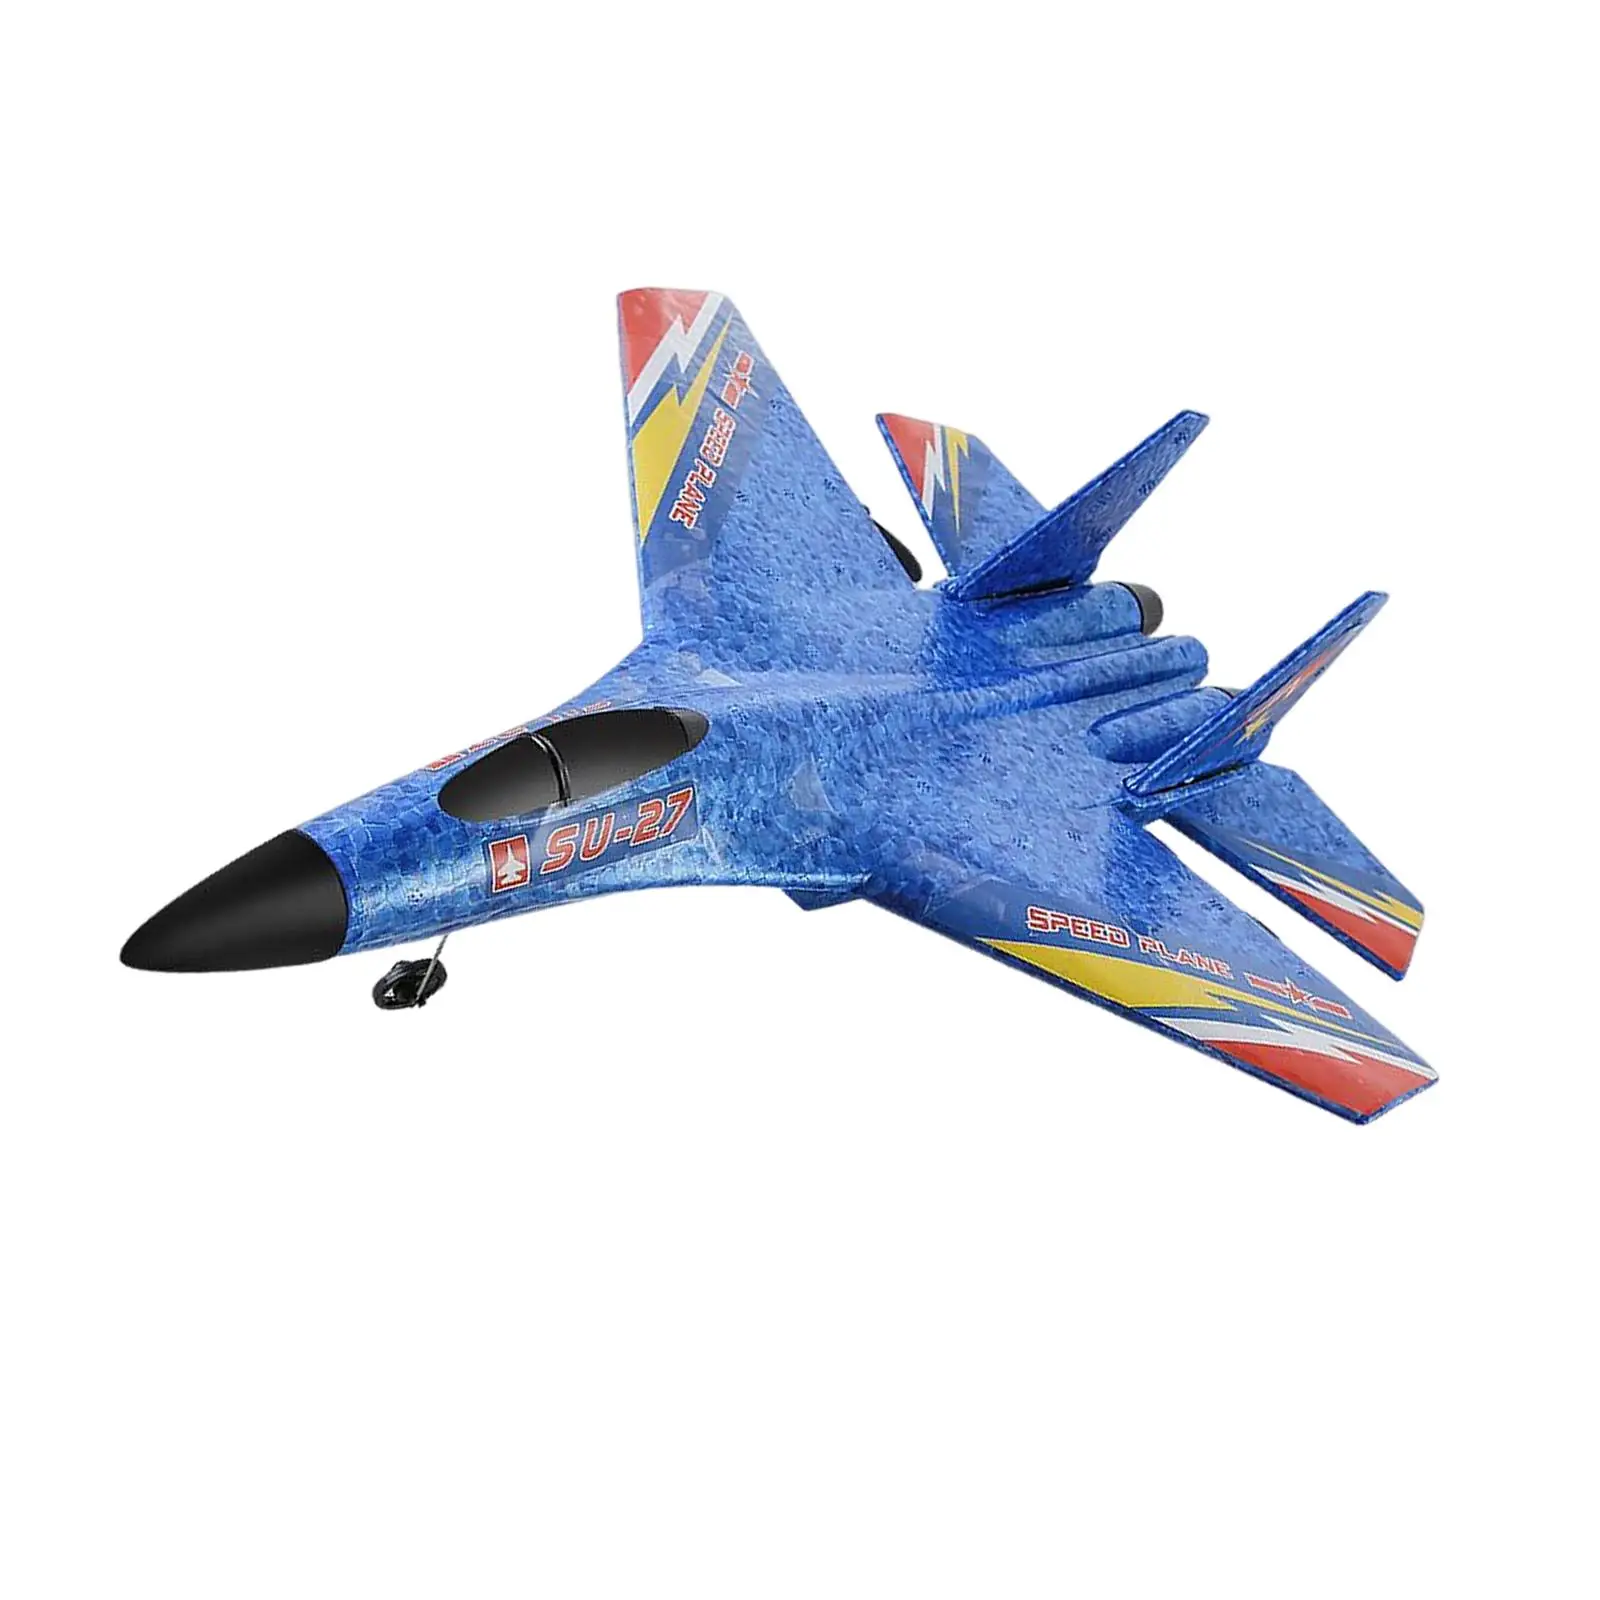  Remote Control  SU27 RC Plane Model Built-in Gyro  High Fixed Wing RC Glider Toys for Children 4Pcs Small Size